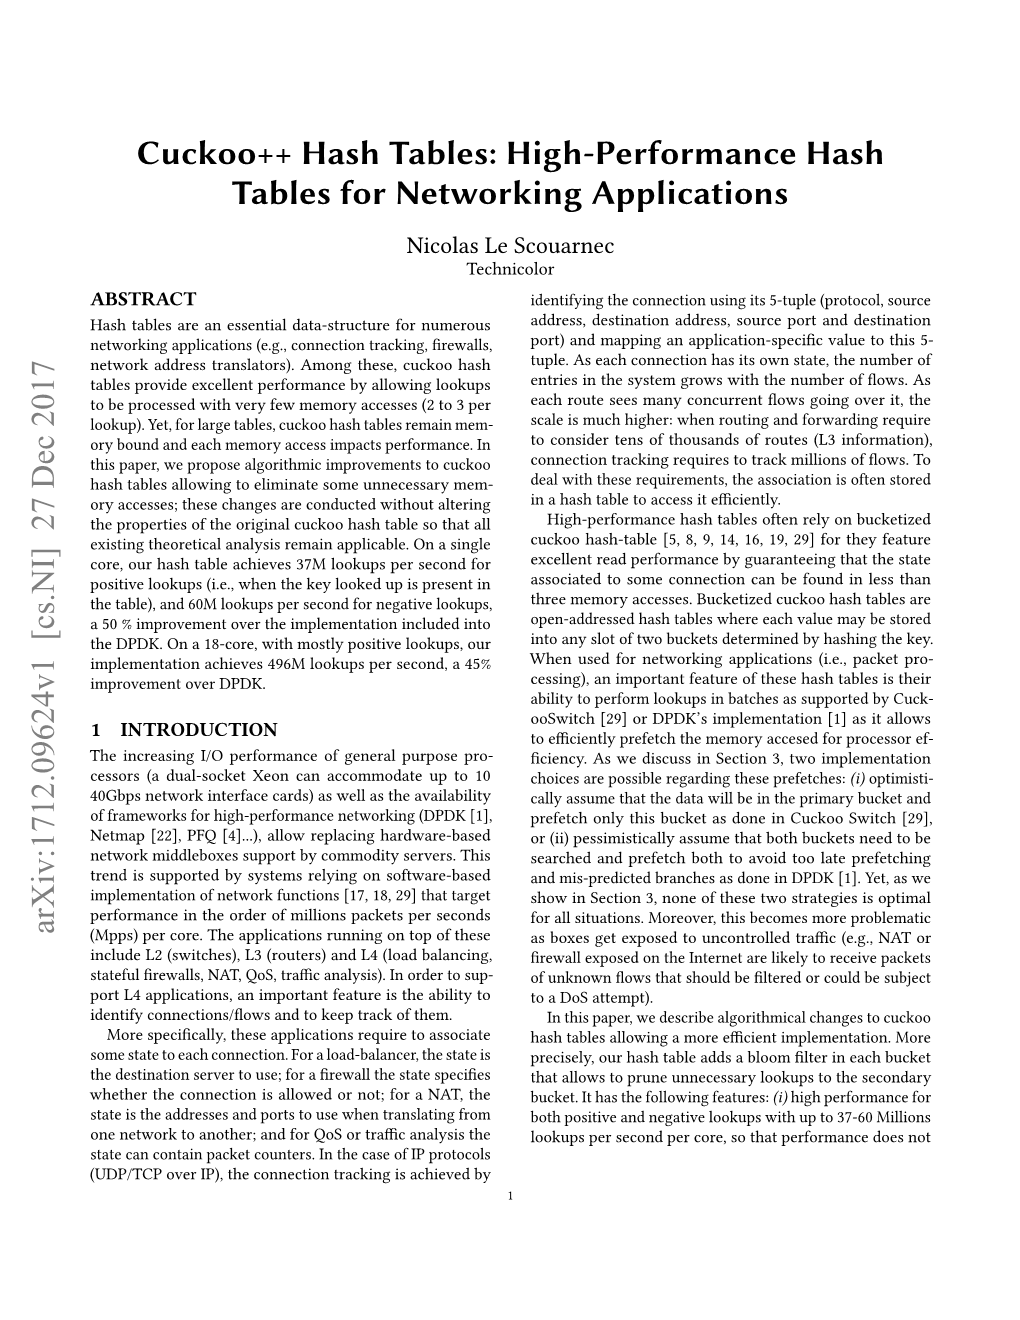 High-Performance Hash Tables for Networking Applications